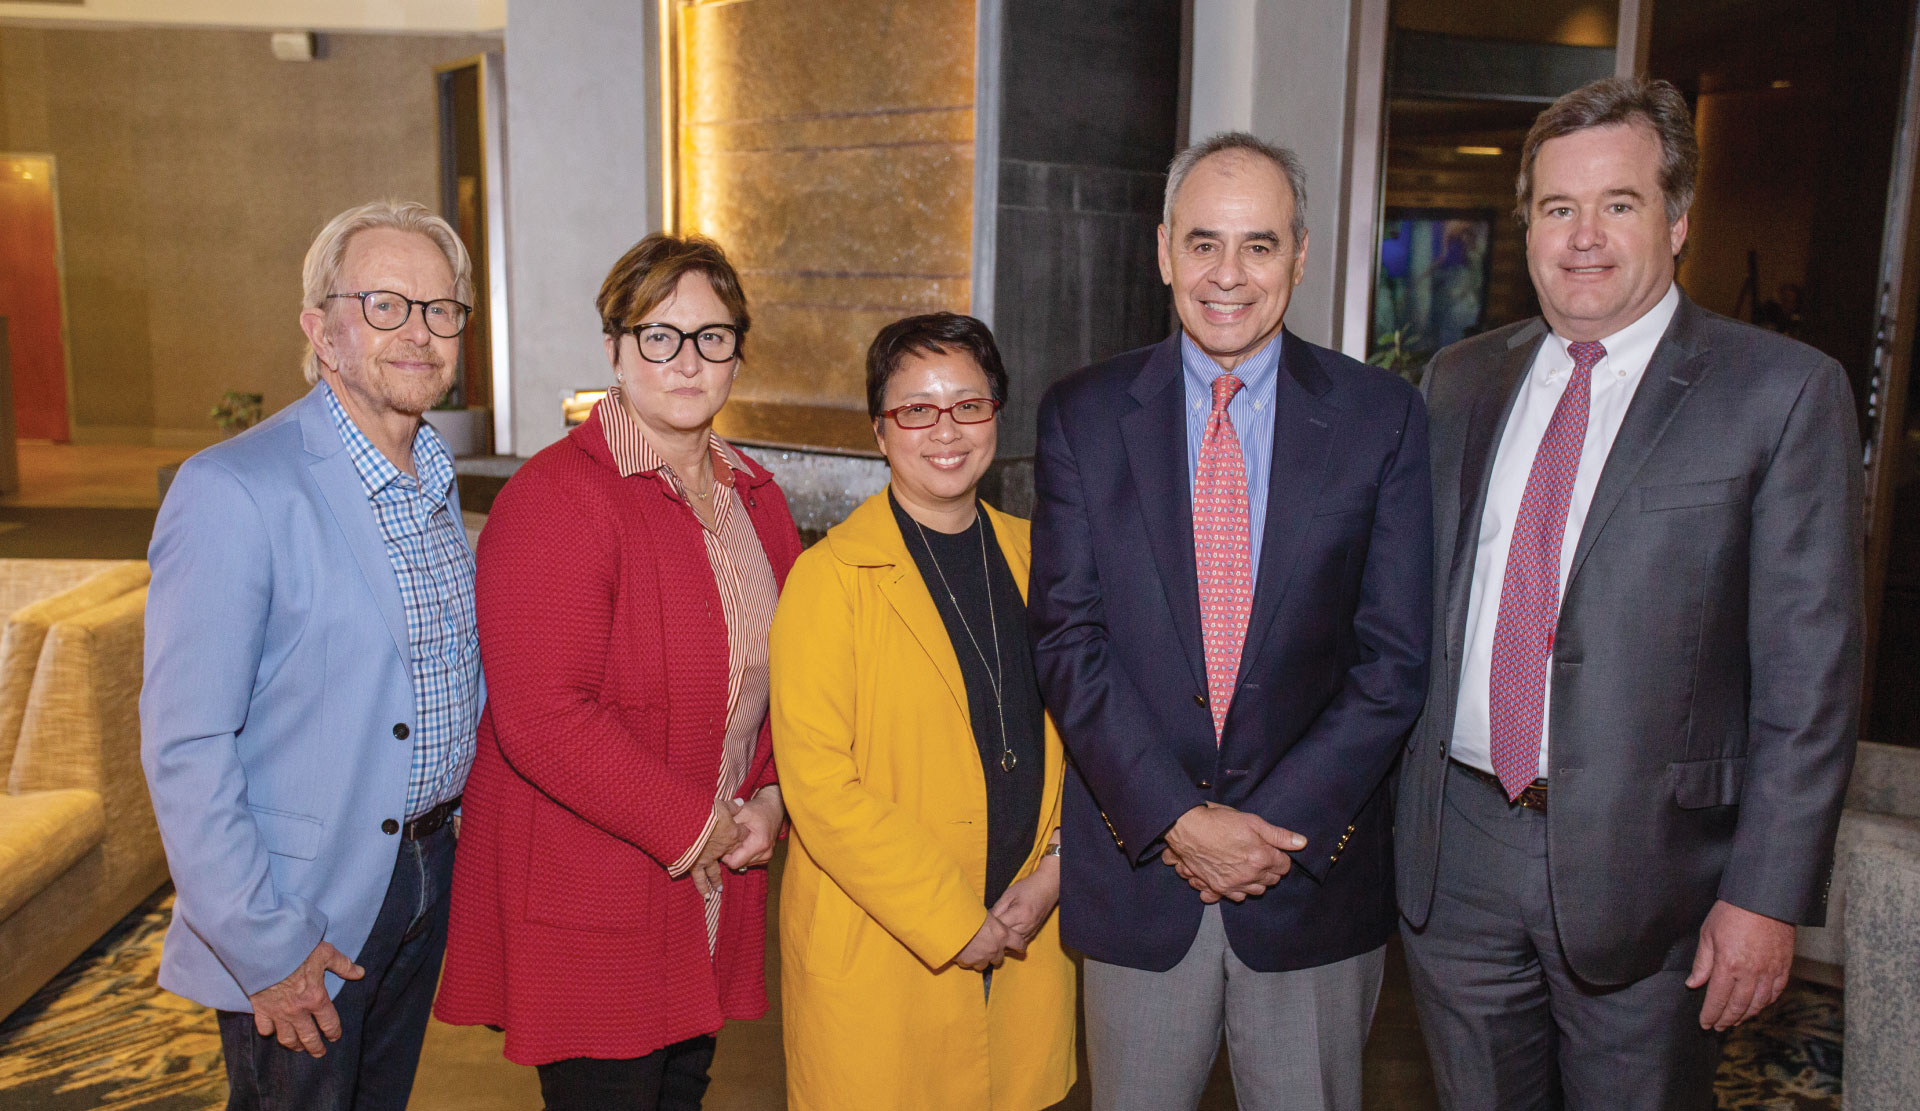 Physician scholars selected in 2019 from left: Dr. Anders Dahlstrom, Dr. Arina Golubeva-Ganeles, Dr. Jill Tiongco, Dr. Peter Gerbino, and Dr. Douglas Sunde